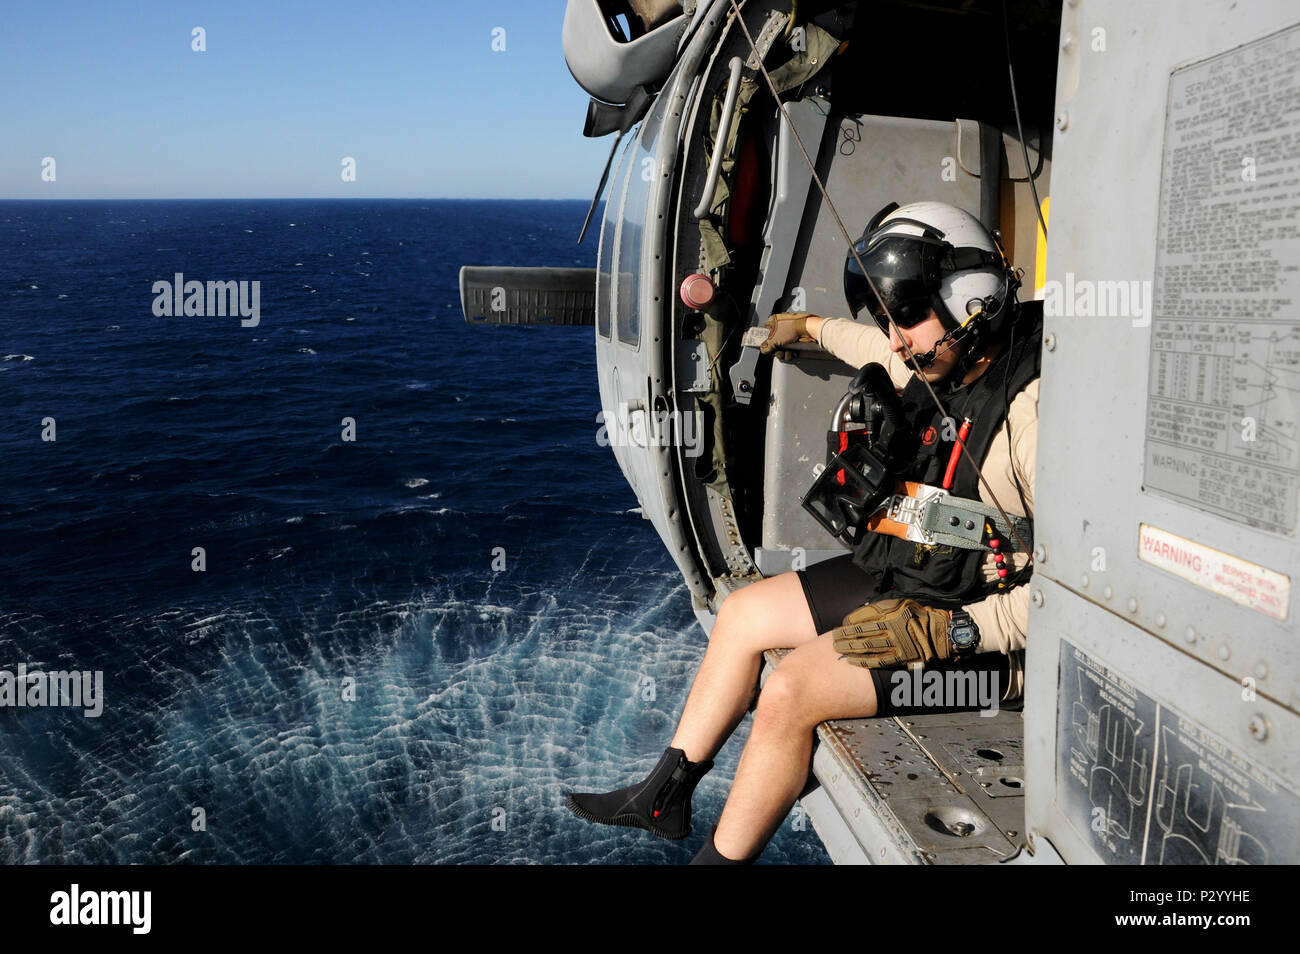 160812-N-XI307-638 ATLANTIC OCEAN (Aug. 12, 2016)  Naval Air Crewman (Helicopter) 3rd Class Dalton Gonzales sits on the edge of  an MH-60S helicopter attached to the 'Tridents' of Helicopter Sea Combat Squadron (HSC) 9 during search and rescue (SAR) training.The aircraft carrier USS George H.W. Bush (CVN 77) is underway conducting training and completing qualifications in preparation for a 2017 deployment. (U.S. Navy photo by Mass Communication Specialist 2nd Class Ryan Seelbach/Released) Stock Photo